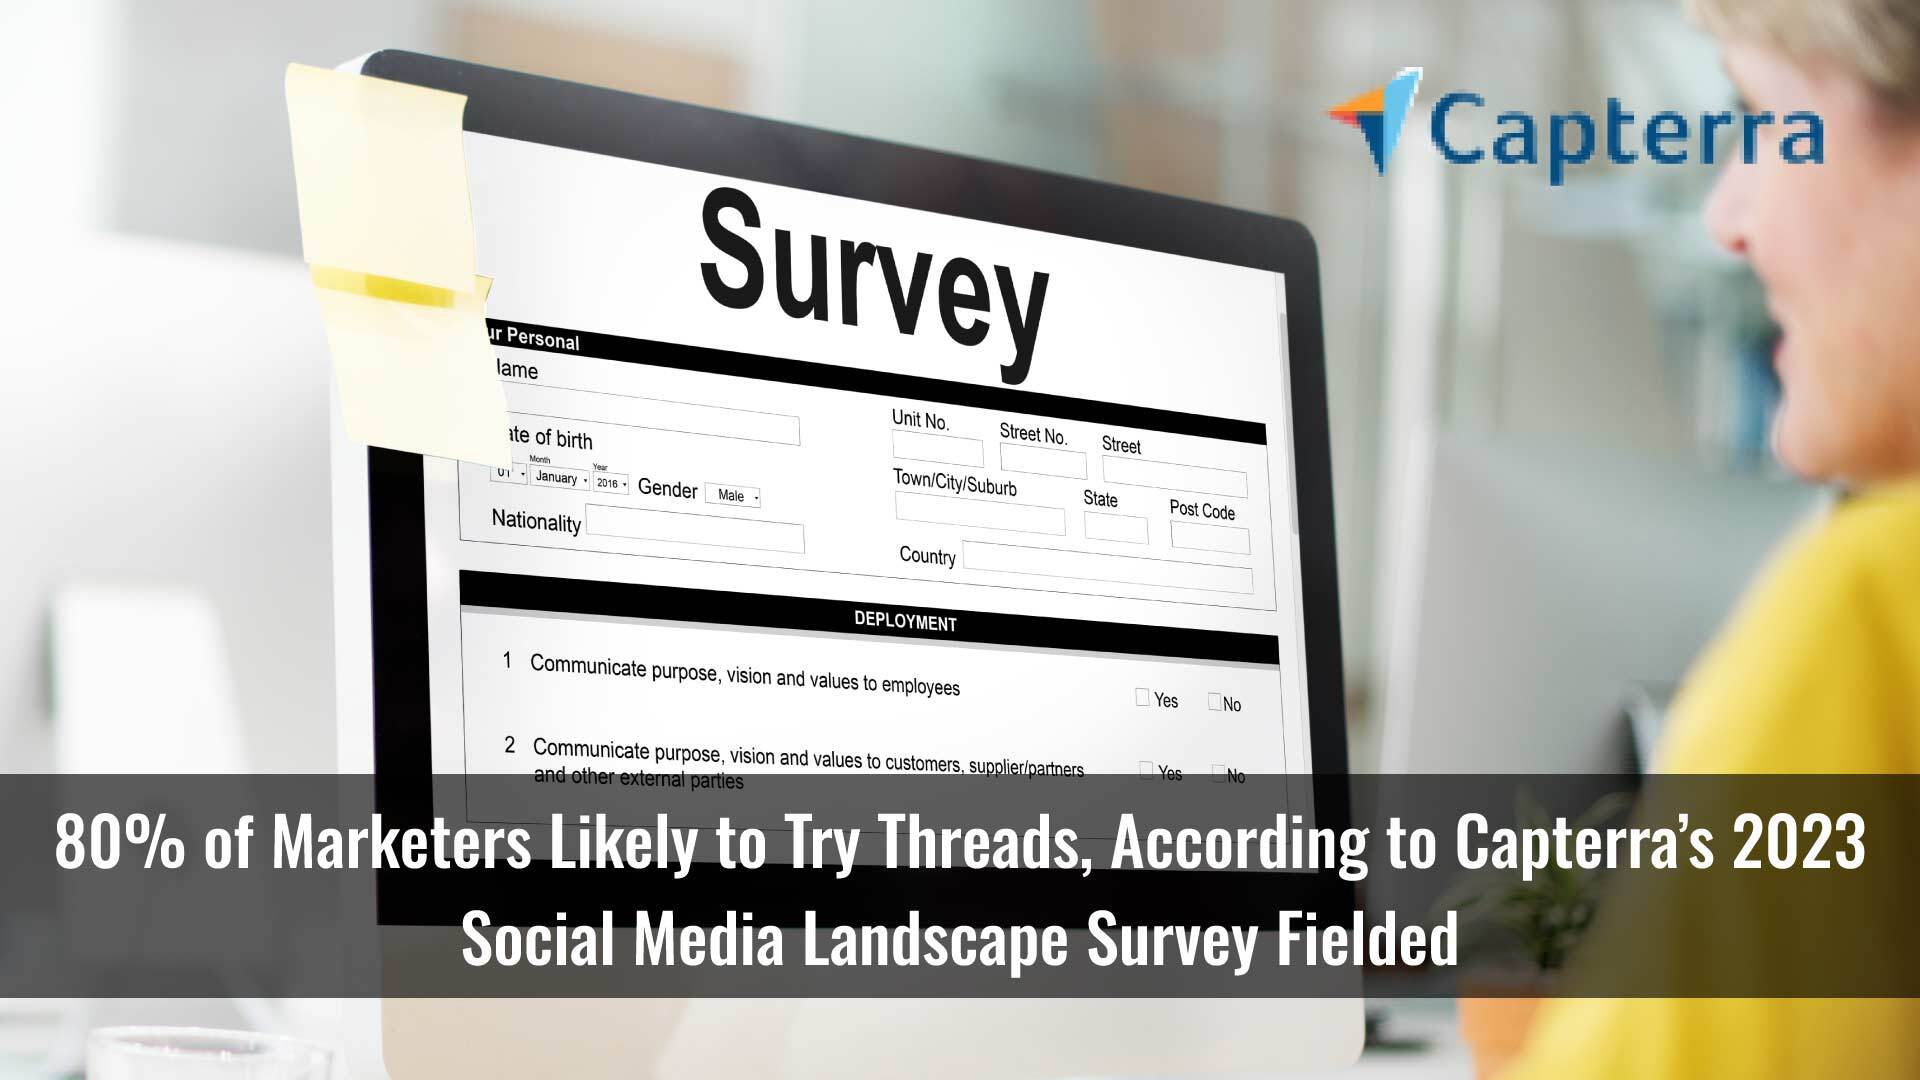 80% of Marketers Likely to Try Threads, but Say It Contributes to More Social Media Fragmentation